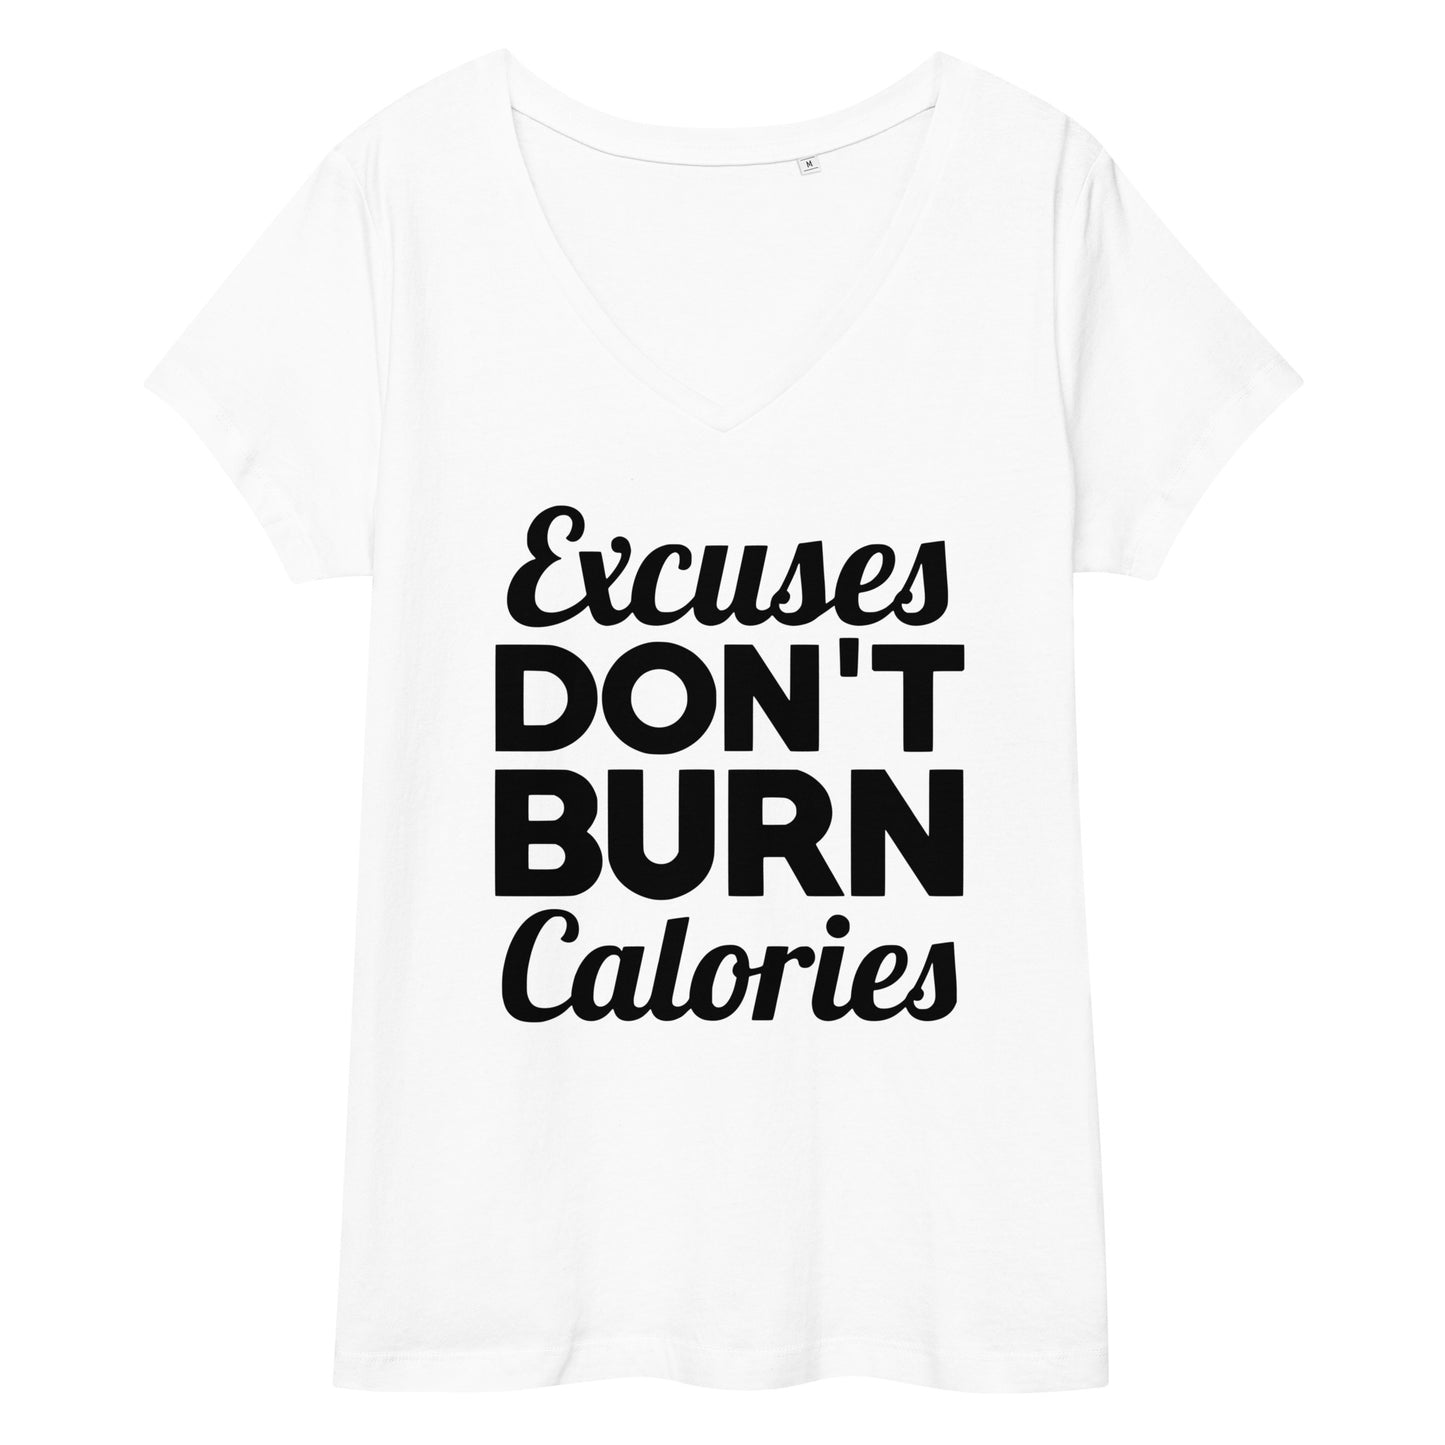 Excuses Don't Burn Calories Women’s v-neck Tee The Workout Inspiration